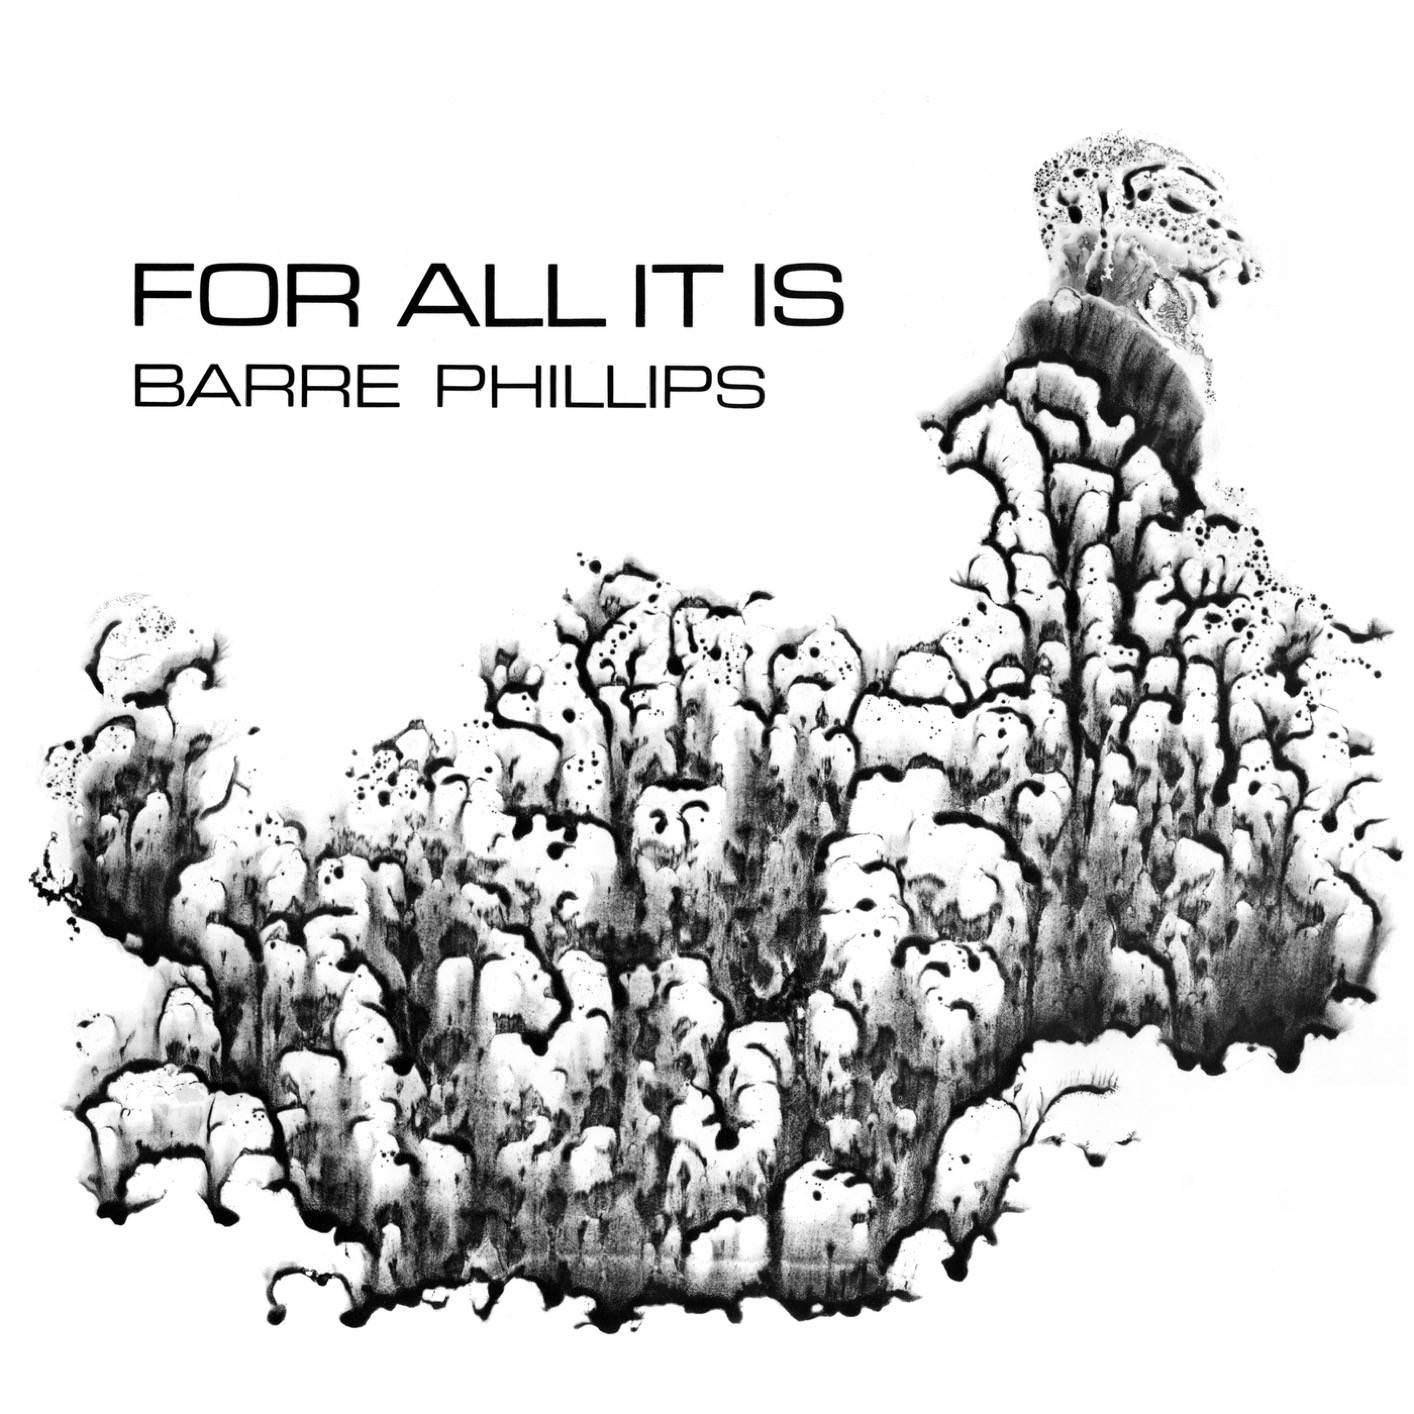 Barre Phillips - For All It Is (1973/2018) [FLAC 24bit/96kHz]